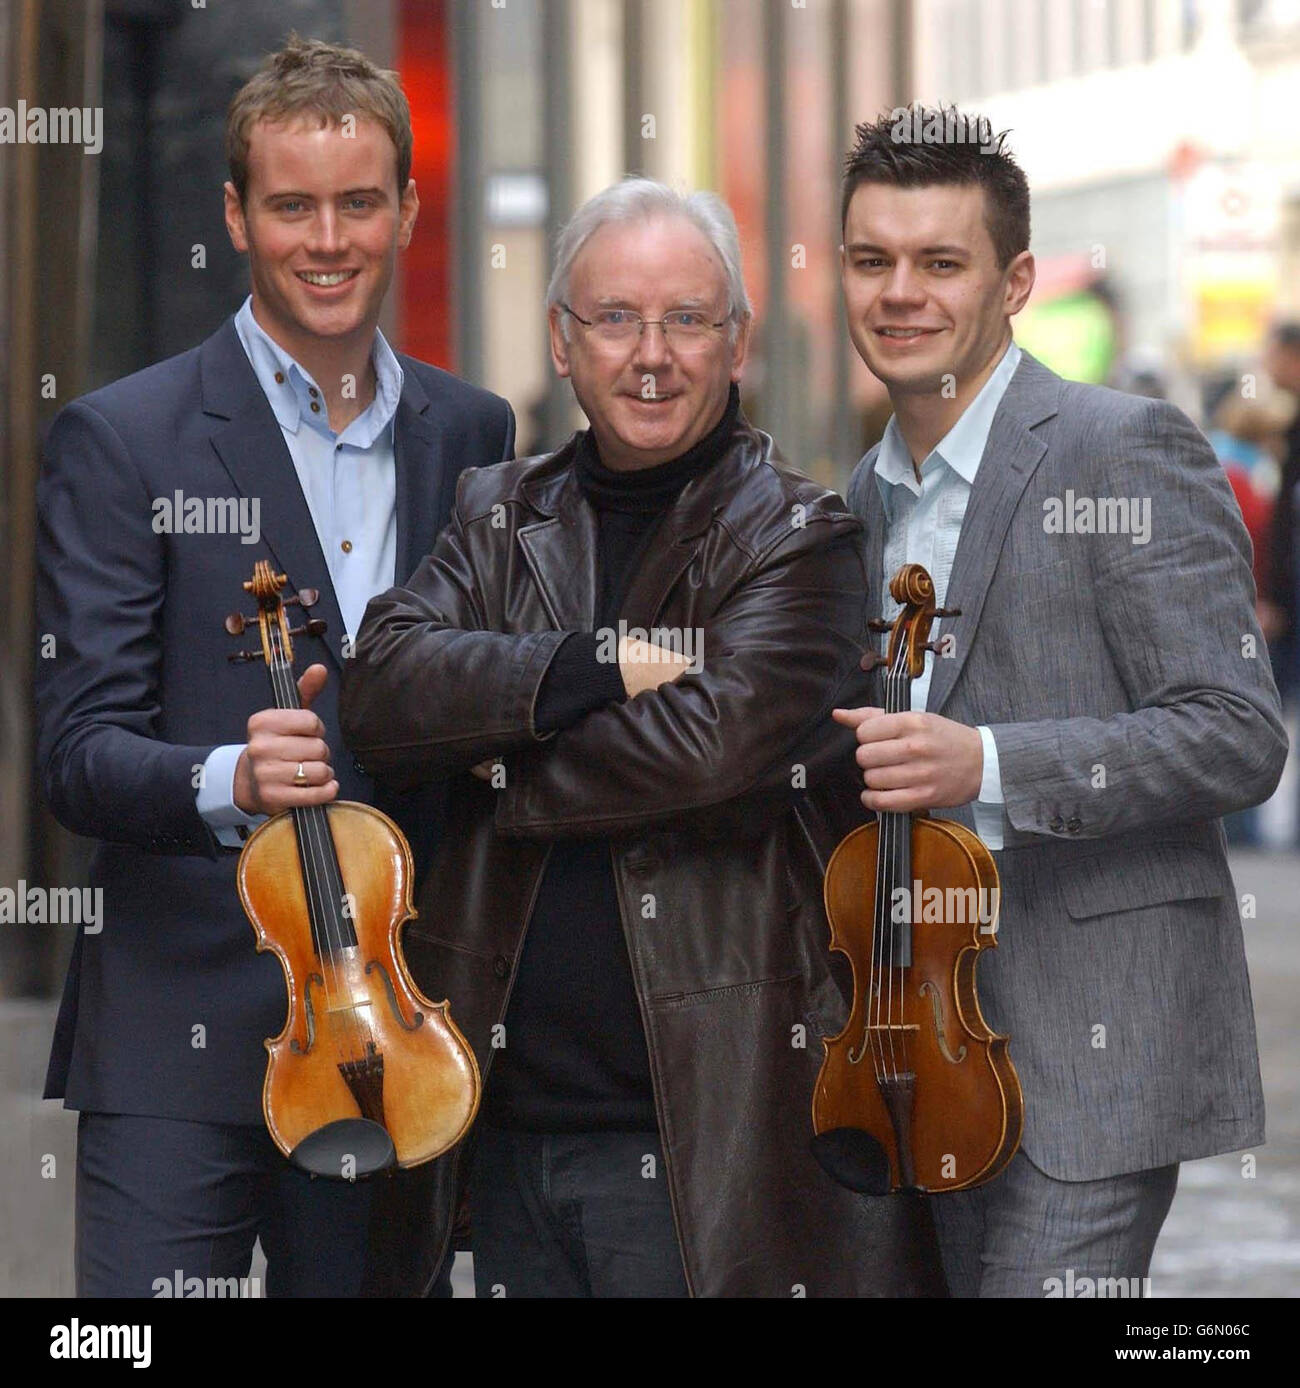 Record producer and Pop Idol judge Pete Waterman with his new signing 'Duel' - Craig Owen (left) and Greg Scott - outside Classic FM studios in central London. Pete signed the duo after hearing them busking in Manchester. Stock Photo